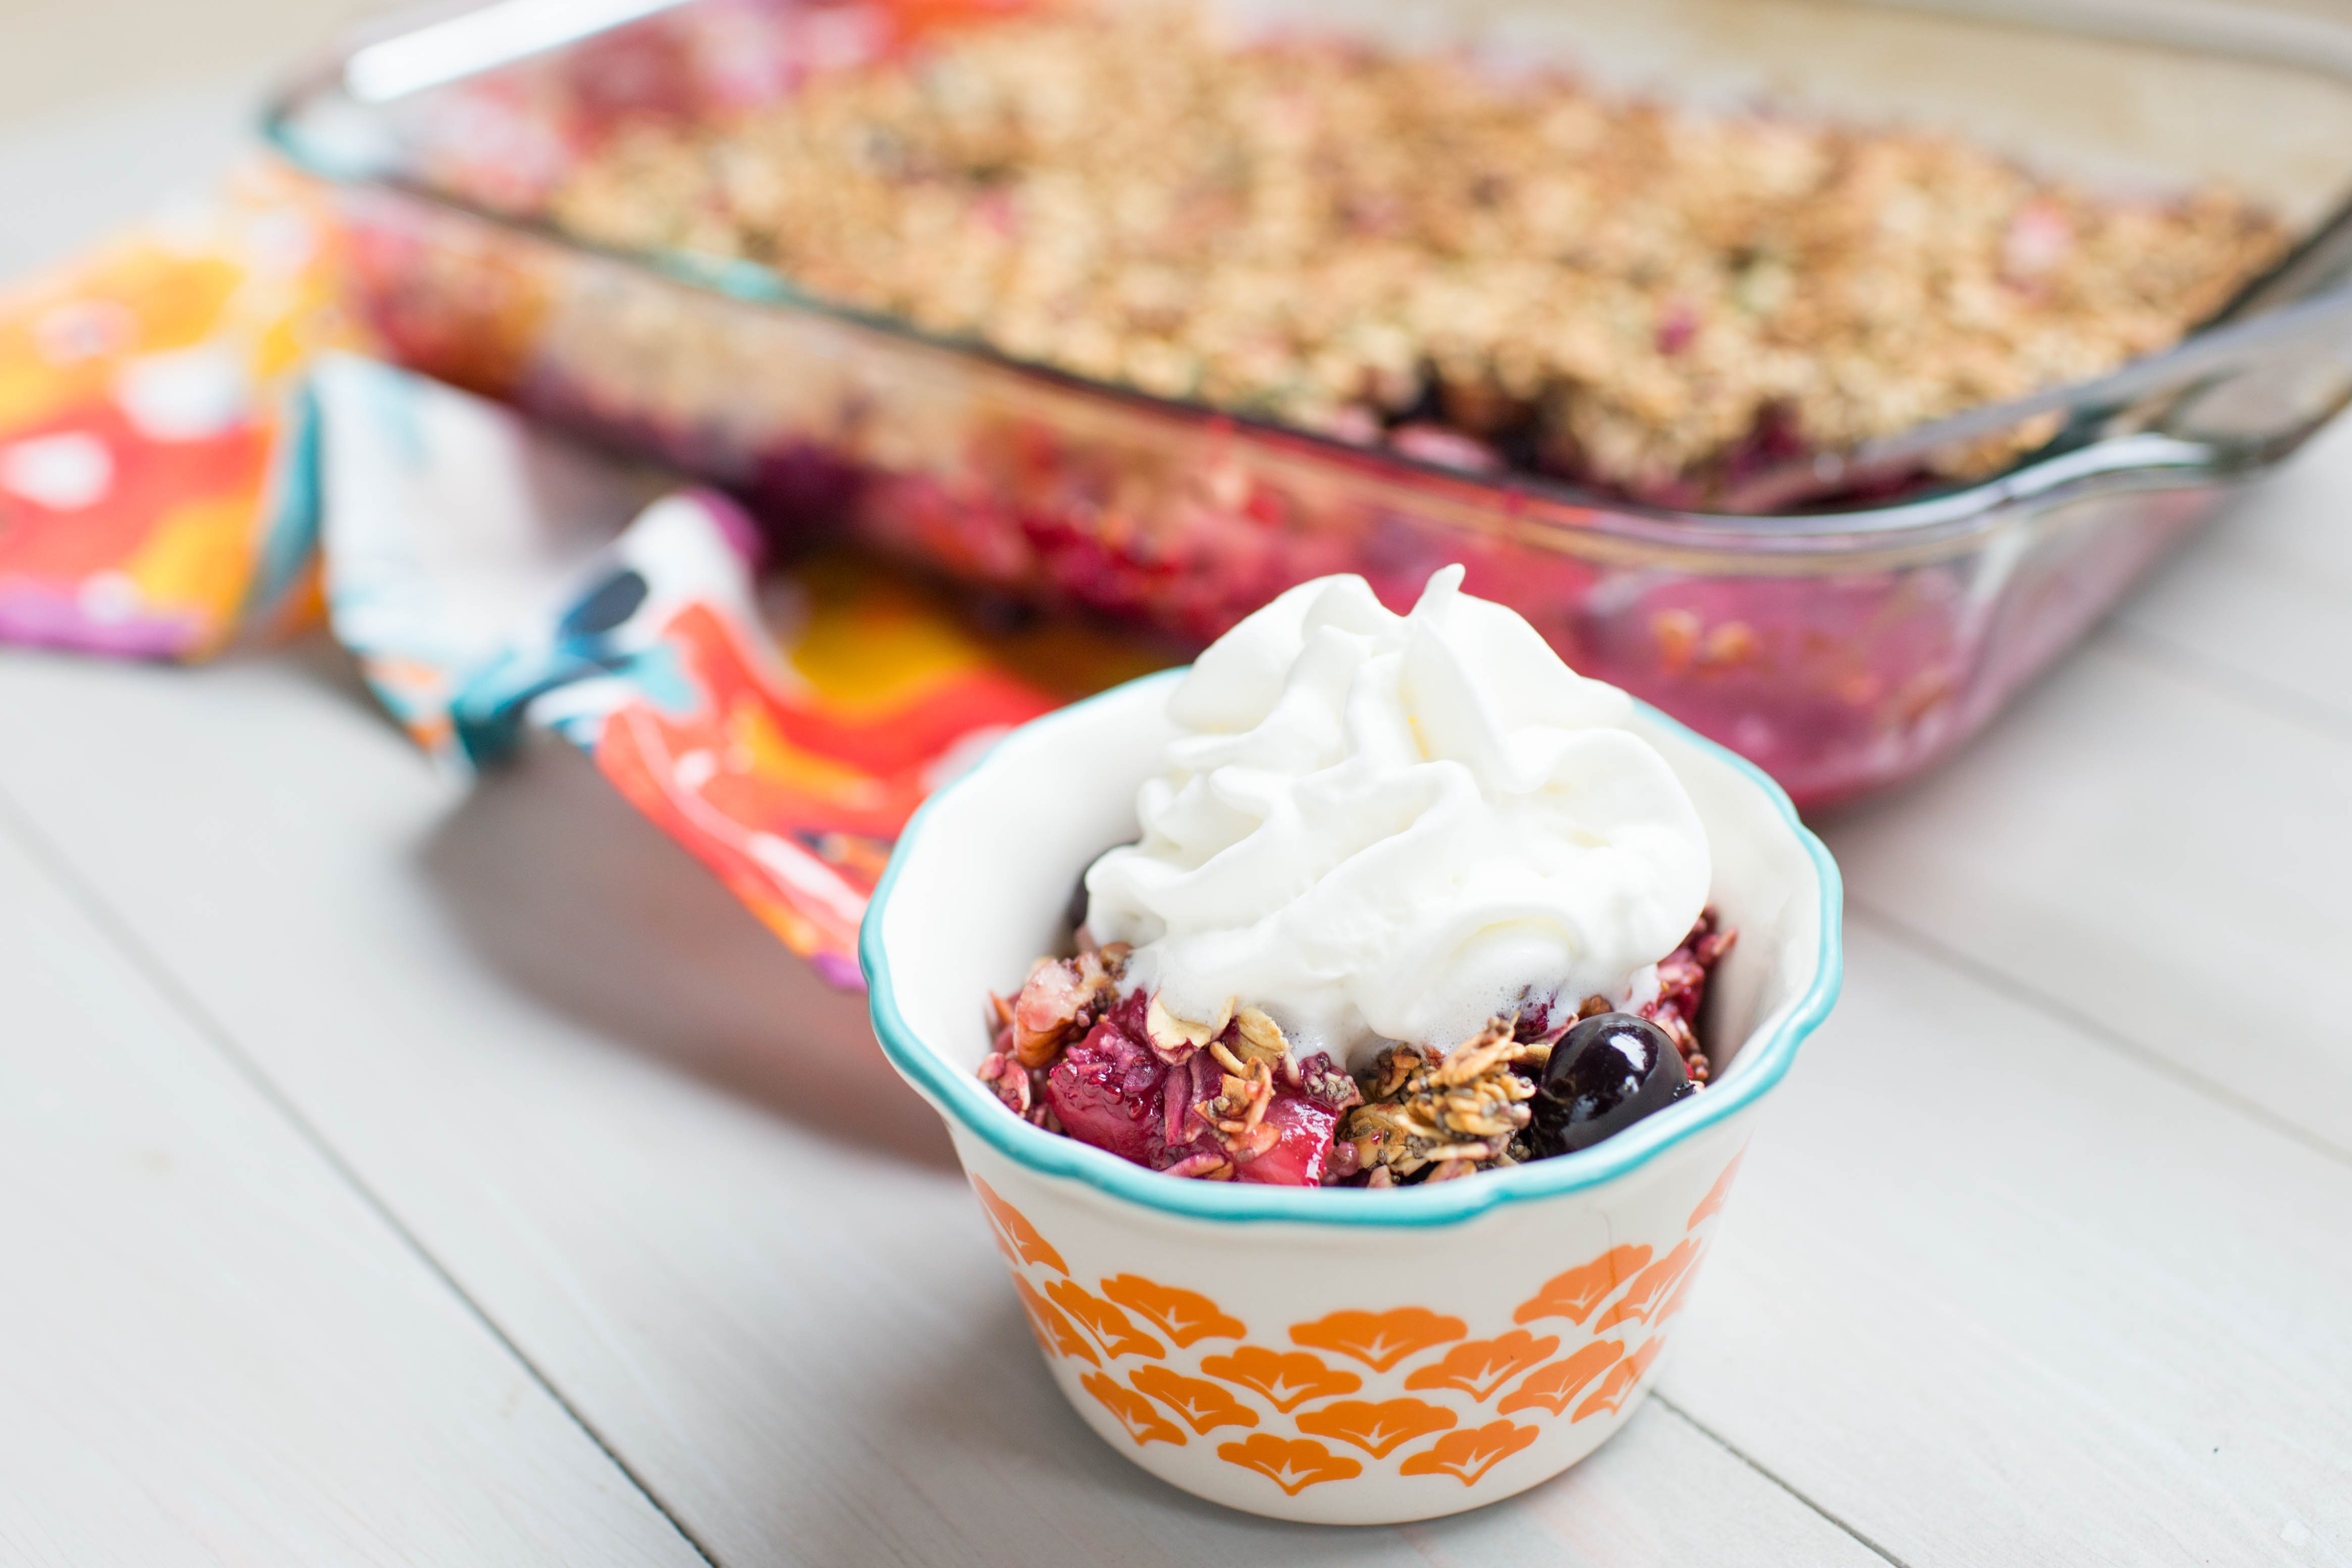 This summer berry crisp is the perfect dessert or breakfast treat! Gluten and dairy free! | read more at happilythehicks.com